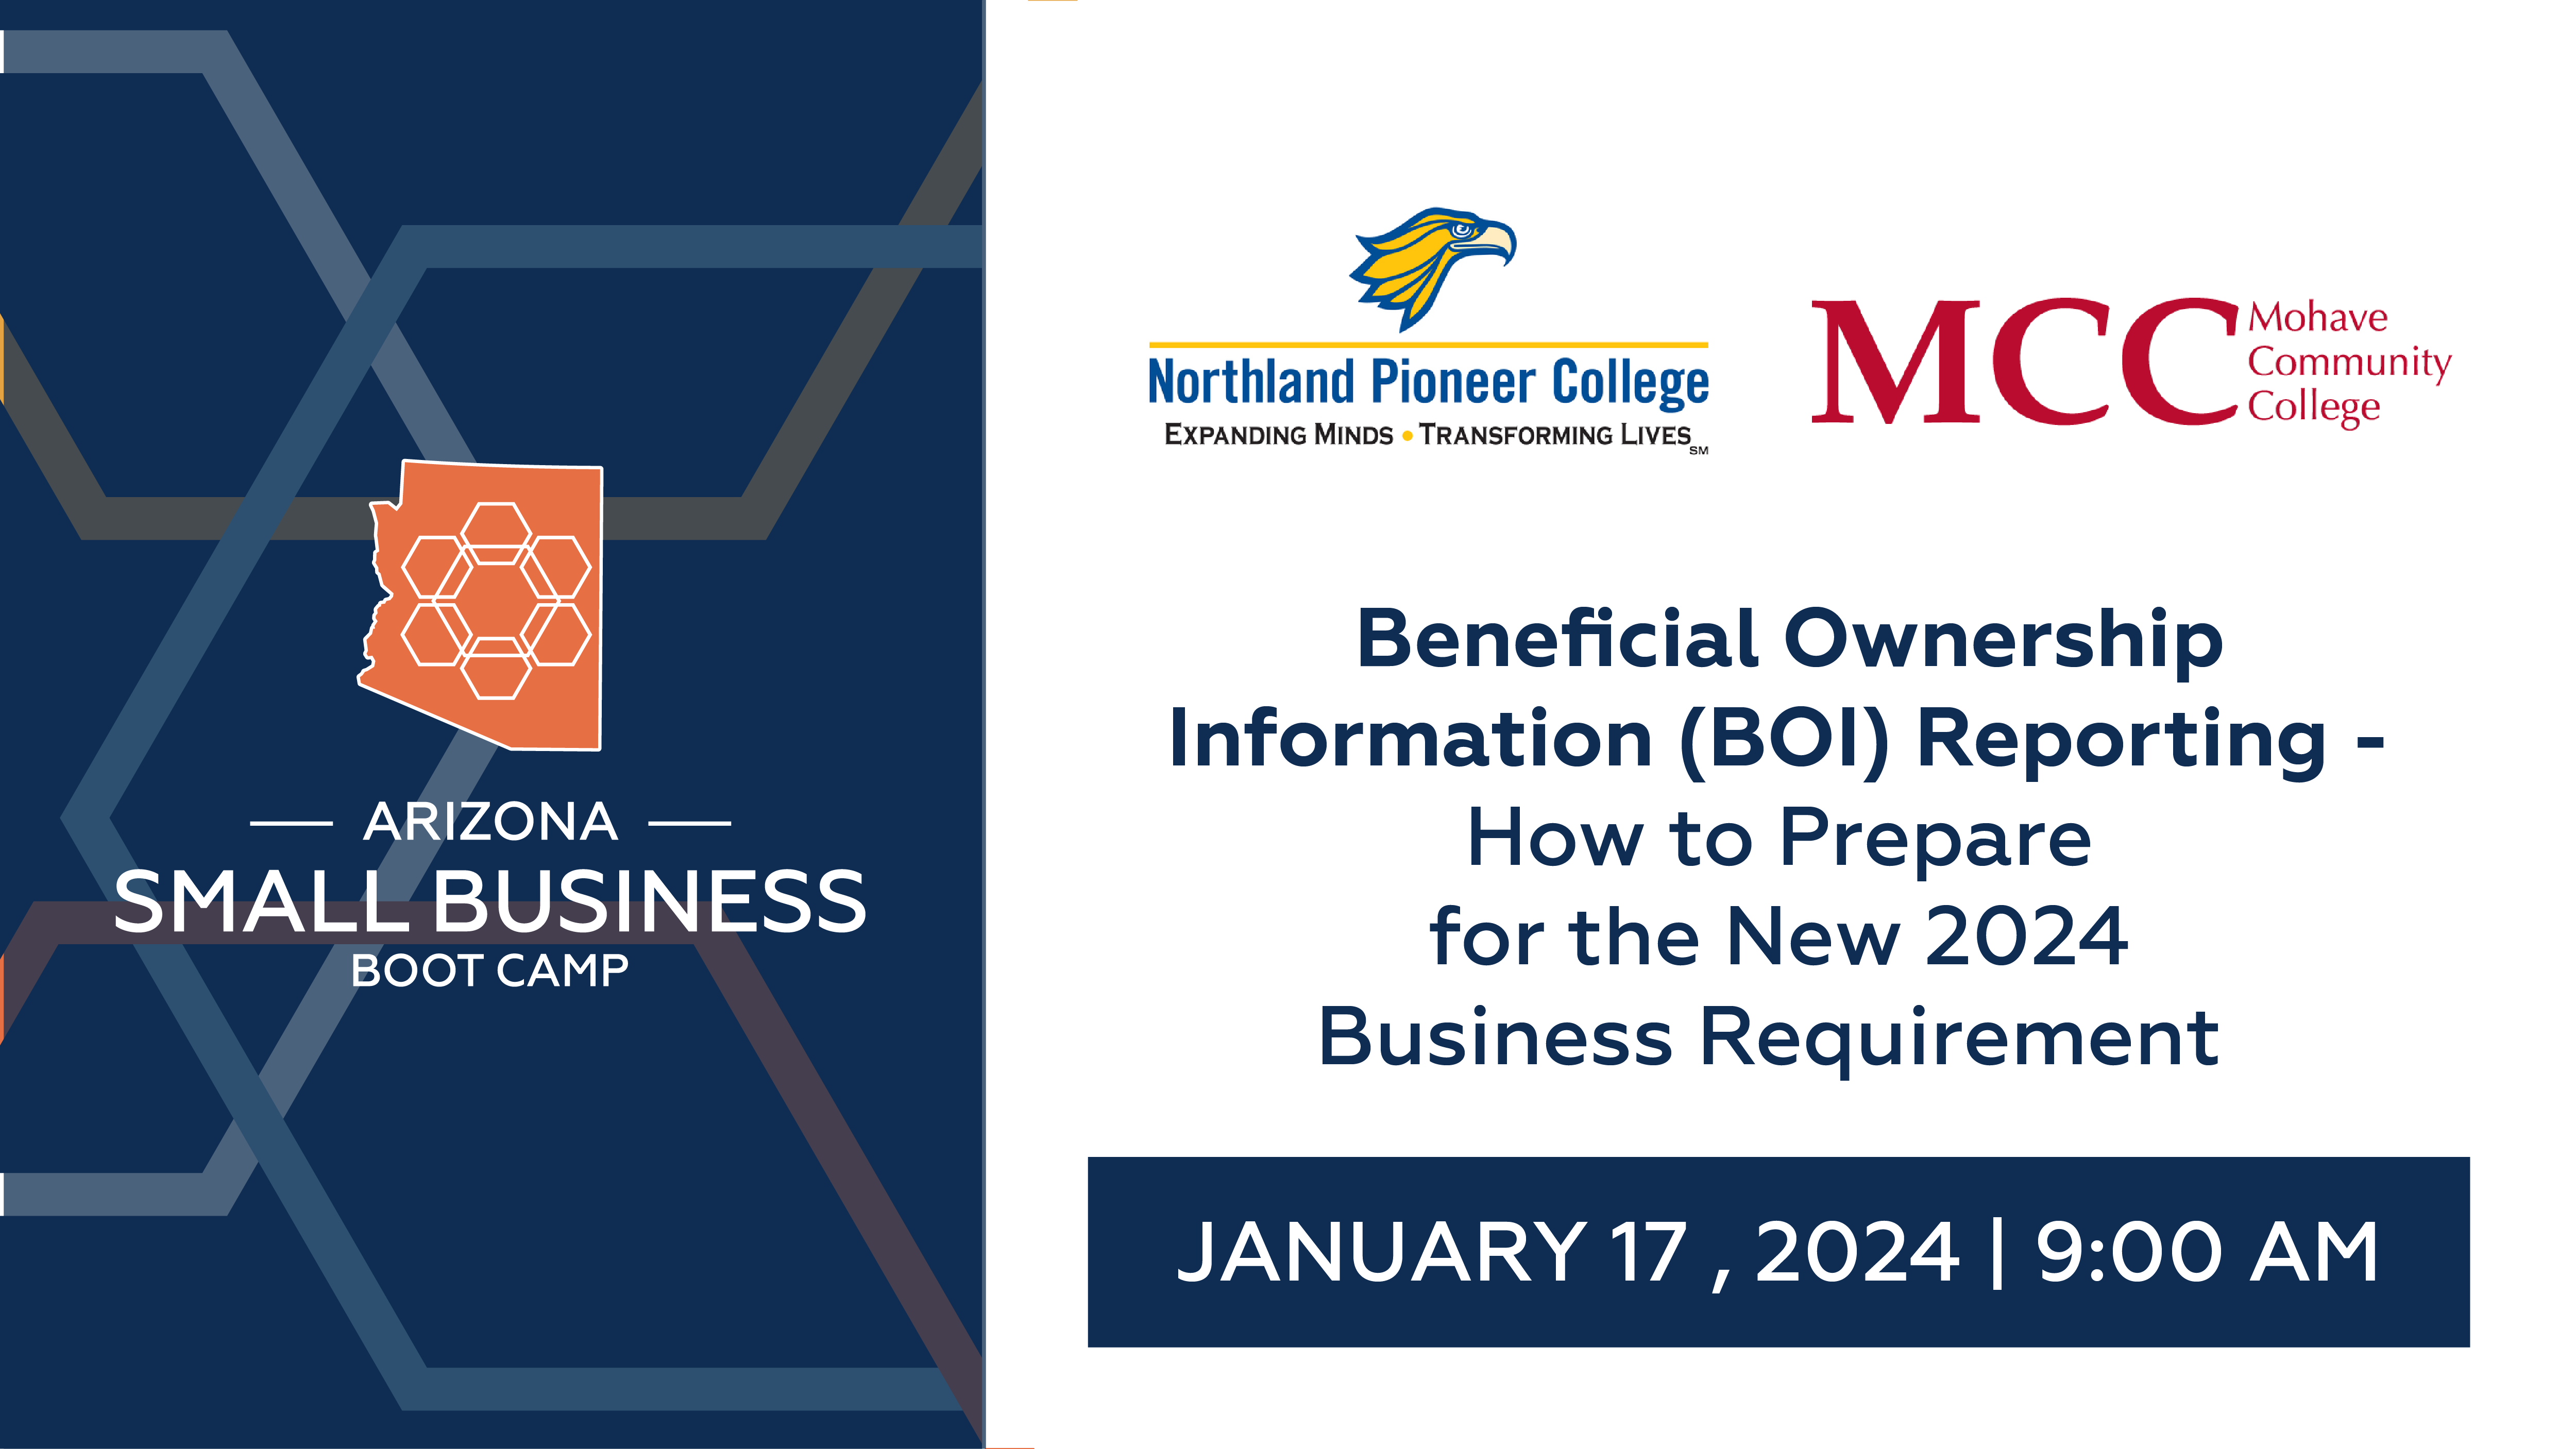 Special Session: Beneficial Ownership Information (BOI) Reporting - How to Prepare for the New 2024 Business Requirement